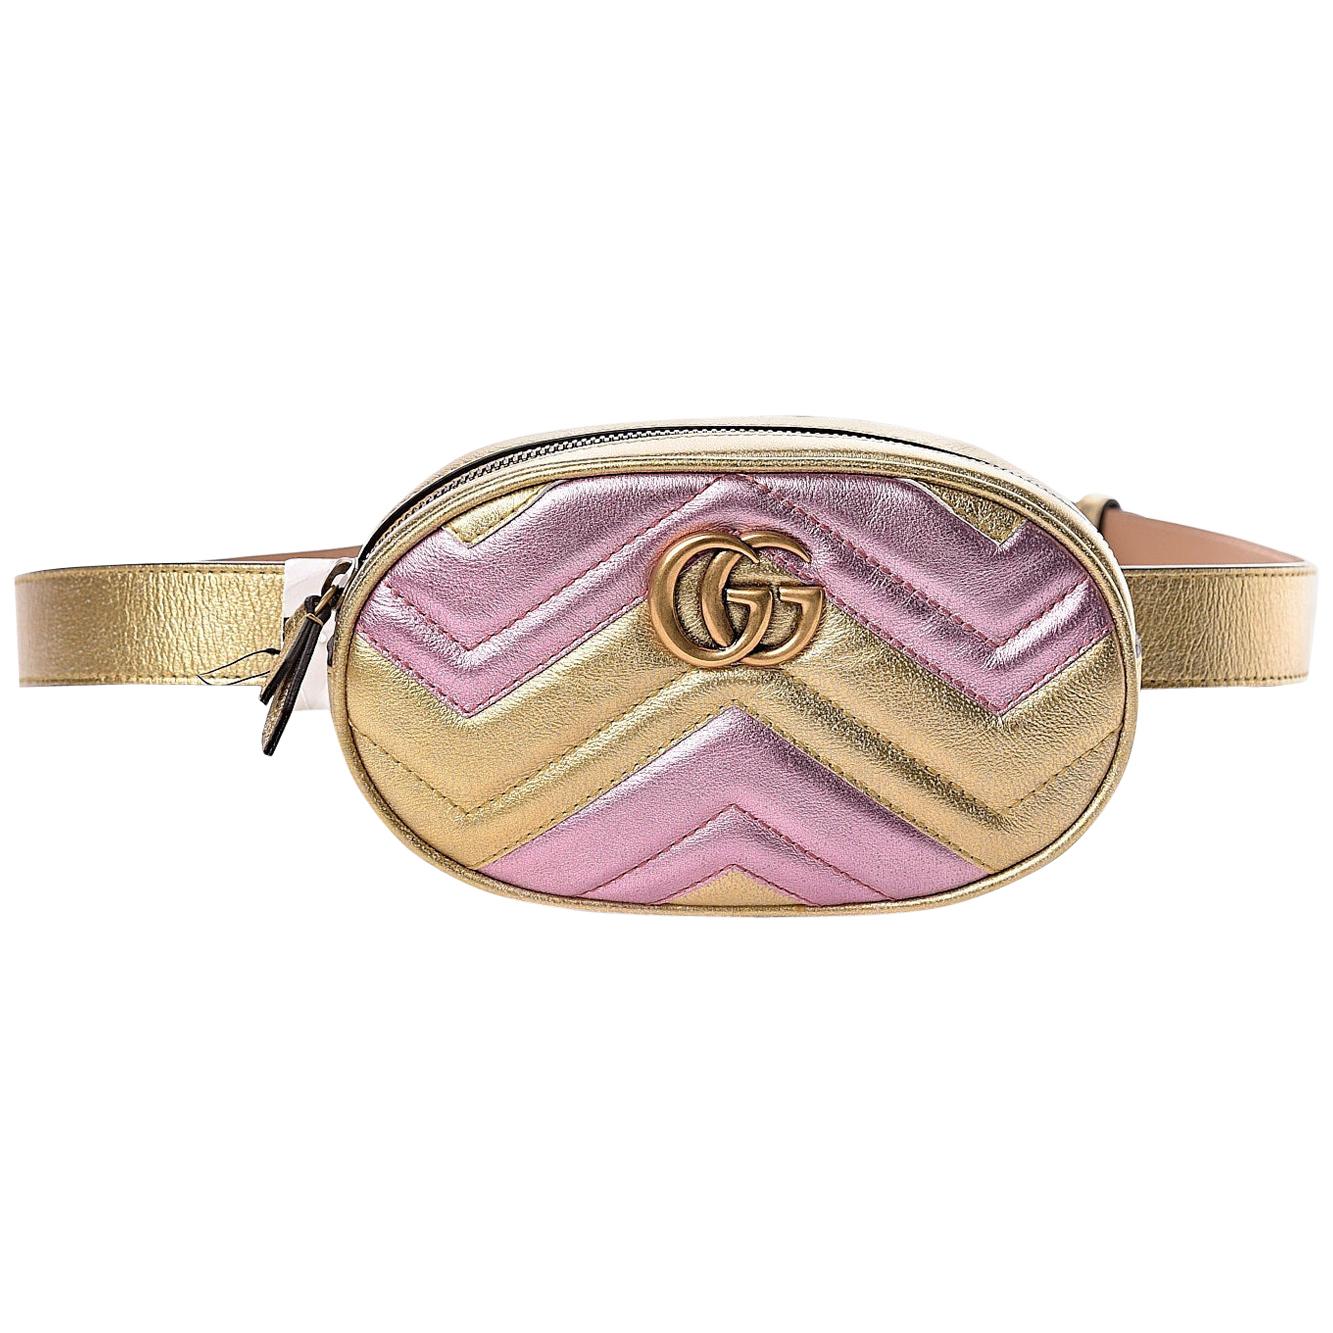 This belt bag is crafted of smooth gold and pink chevron stitched calfskin leather. Featuring  an oval shape with a leather belt, aged GG logo on the front and a heart shape on the back.

COLOR: Gold & pink
ITEM CODE: 476434 525040
MATERIAL: